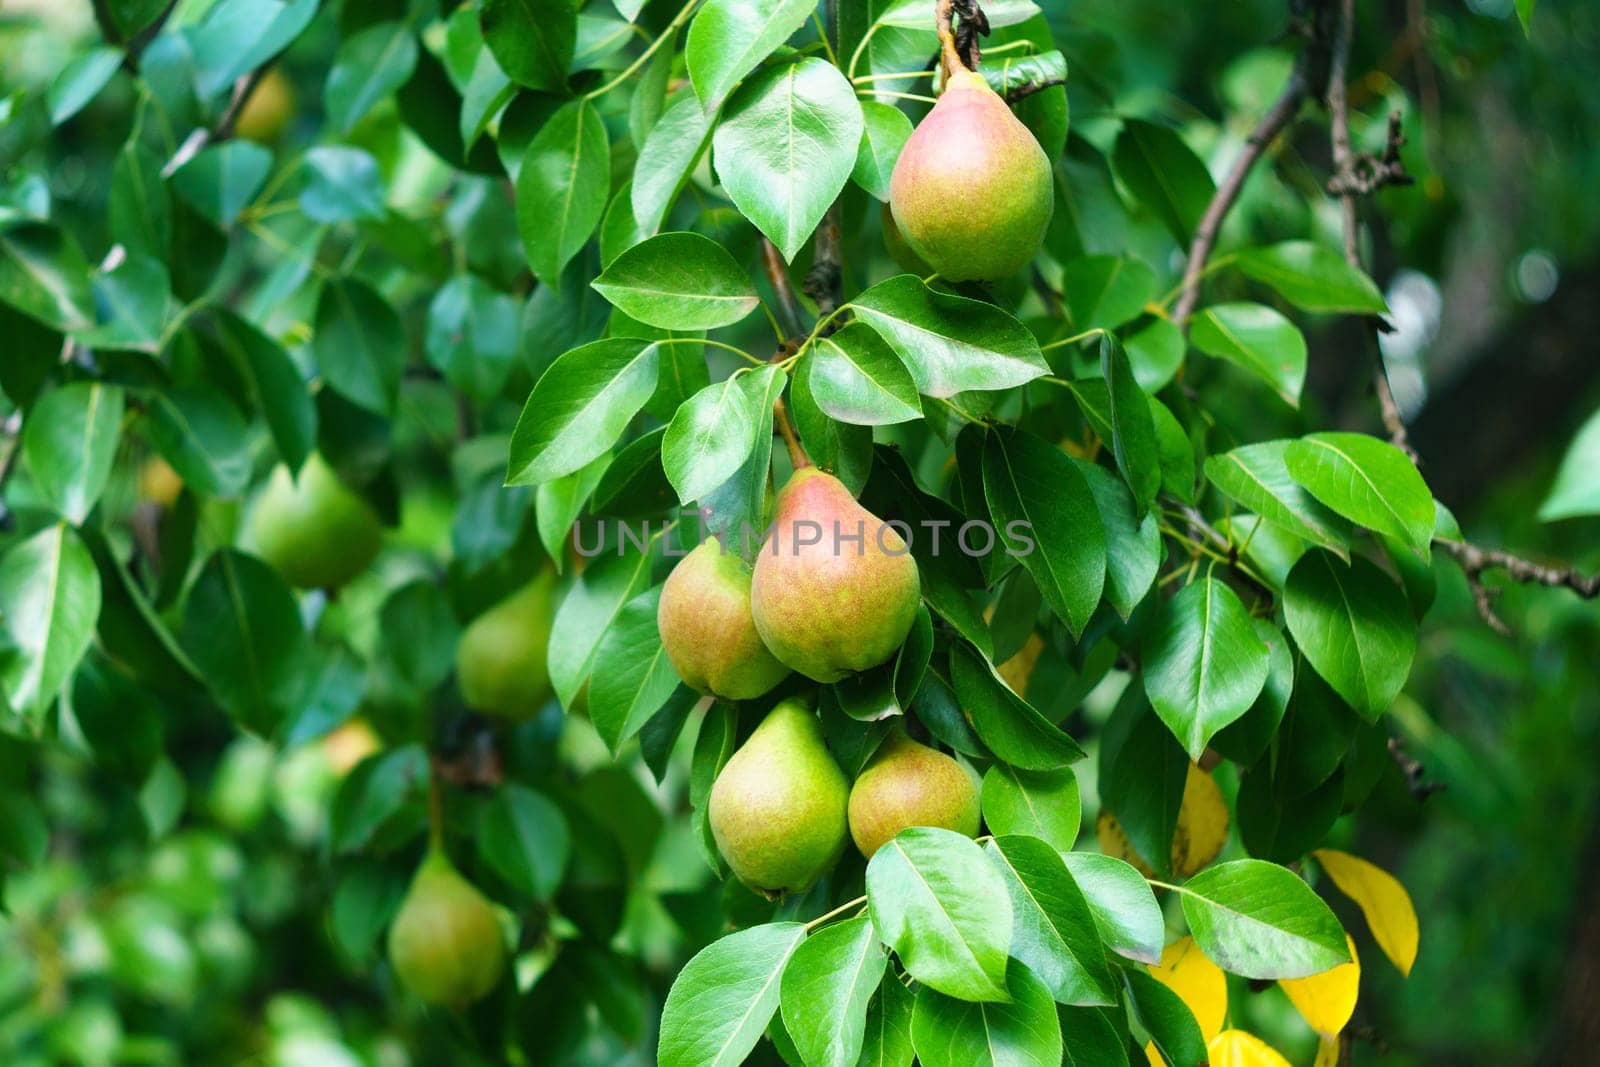 Pears on a tree, close-up of the harvest. Summer garden. Selective focus